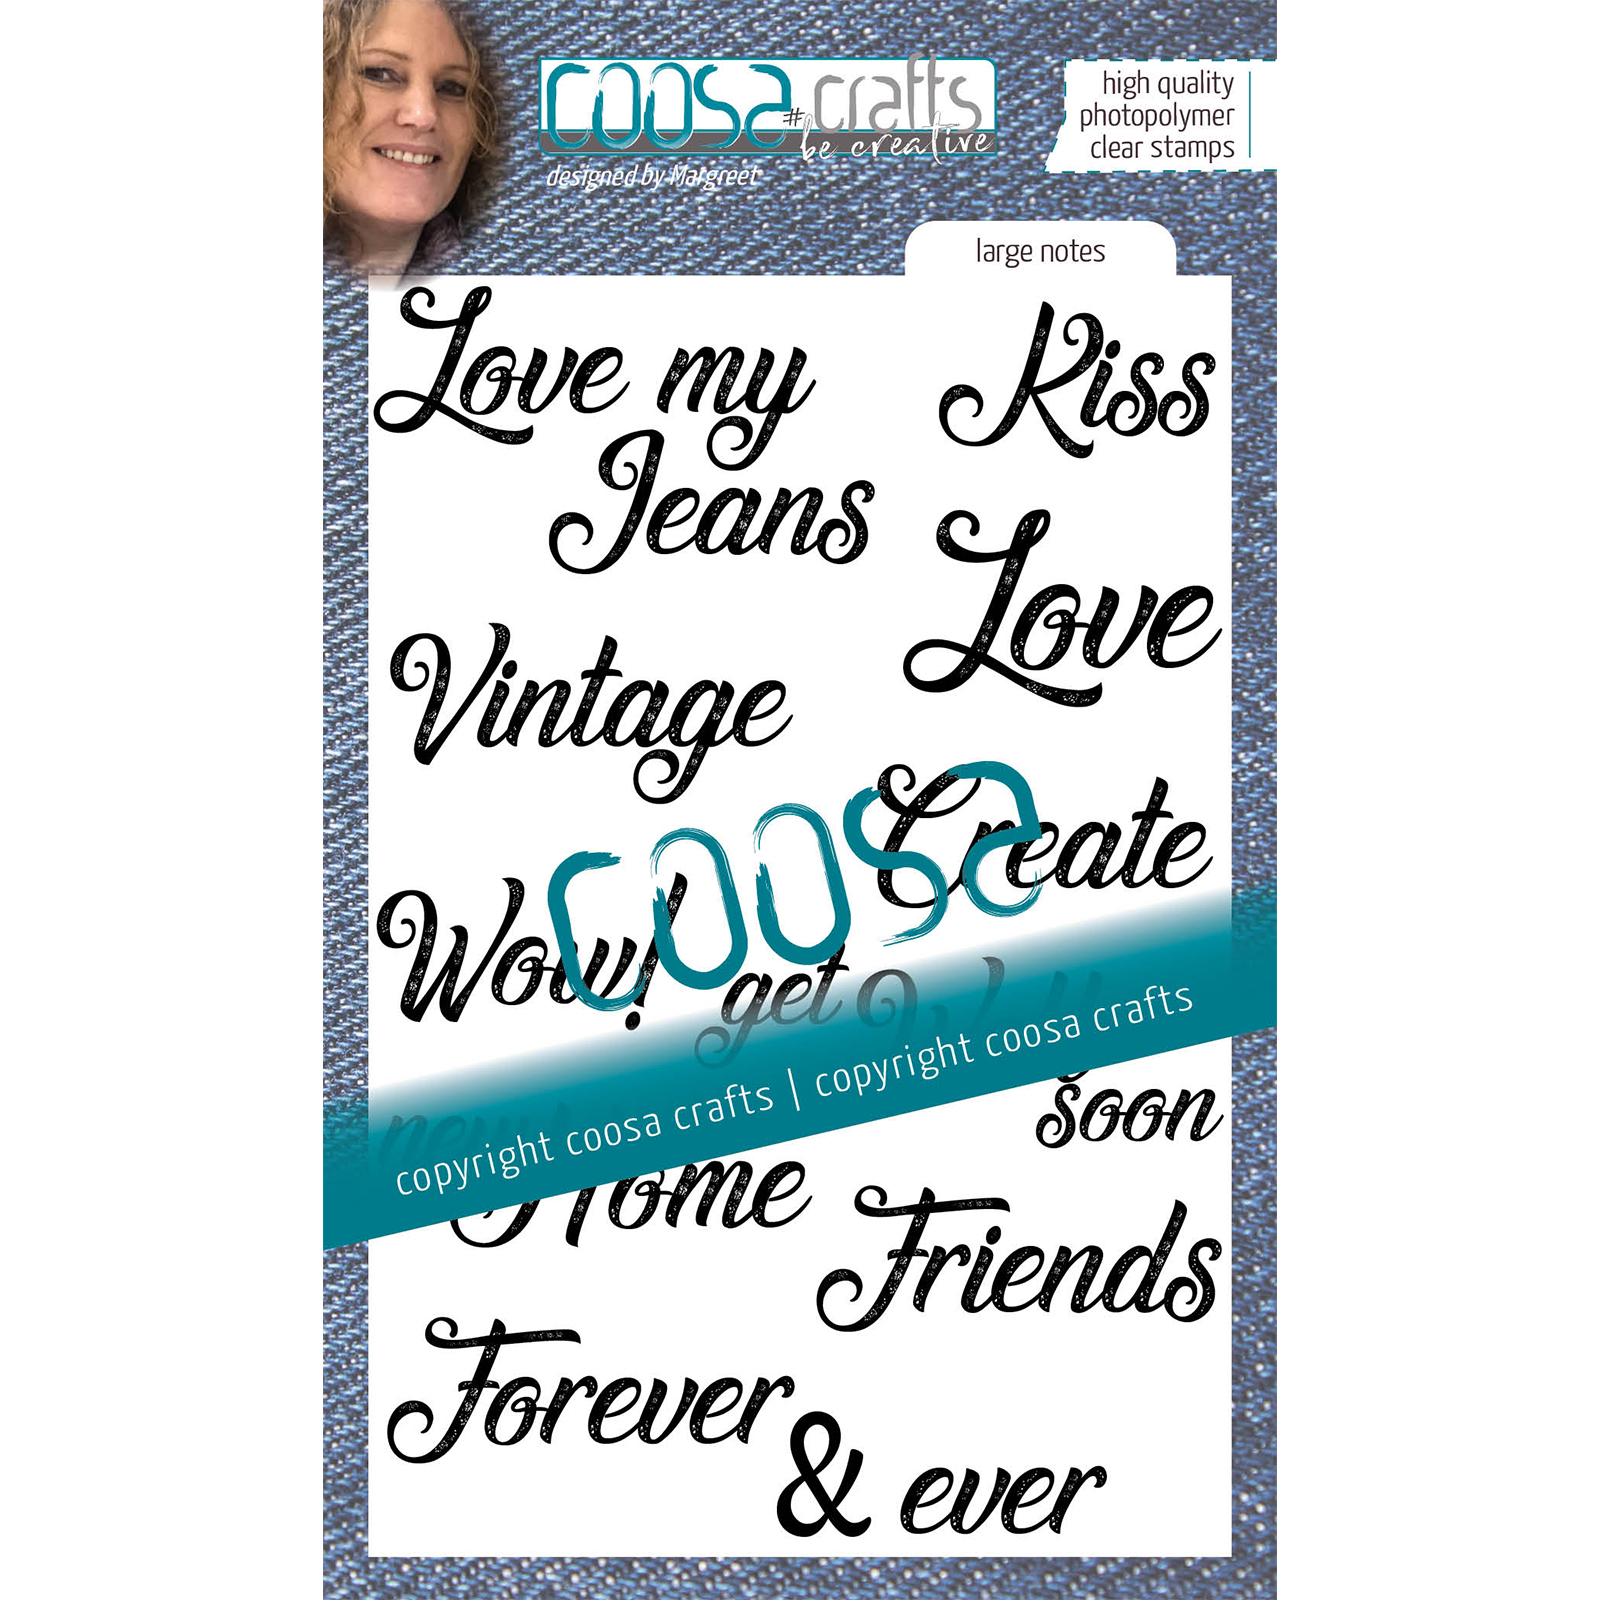 COOSA Crafts • Clear stamp A6 Love my jeans - Large notes